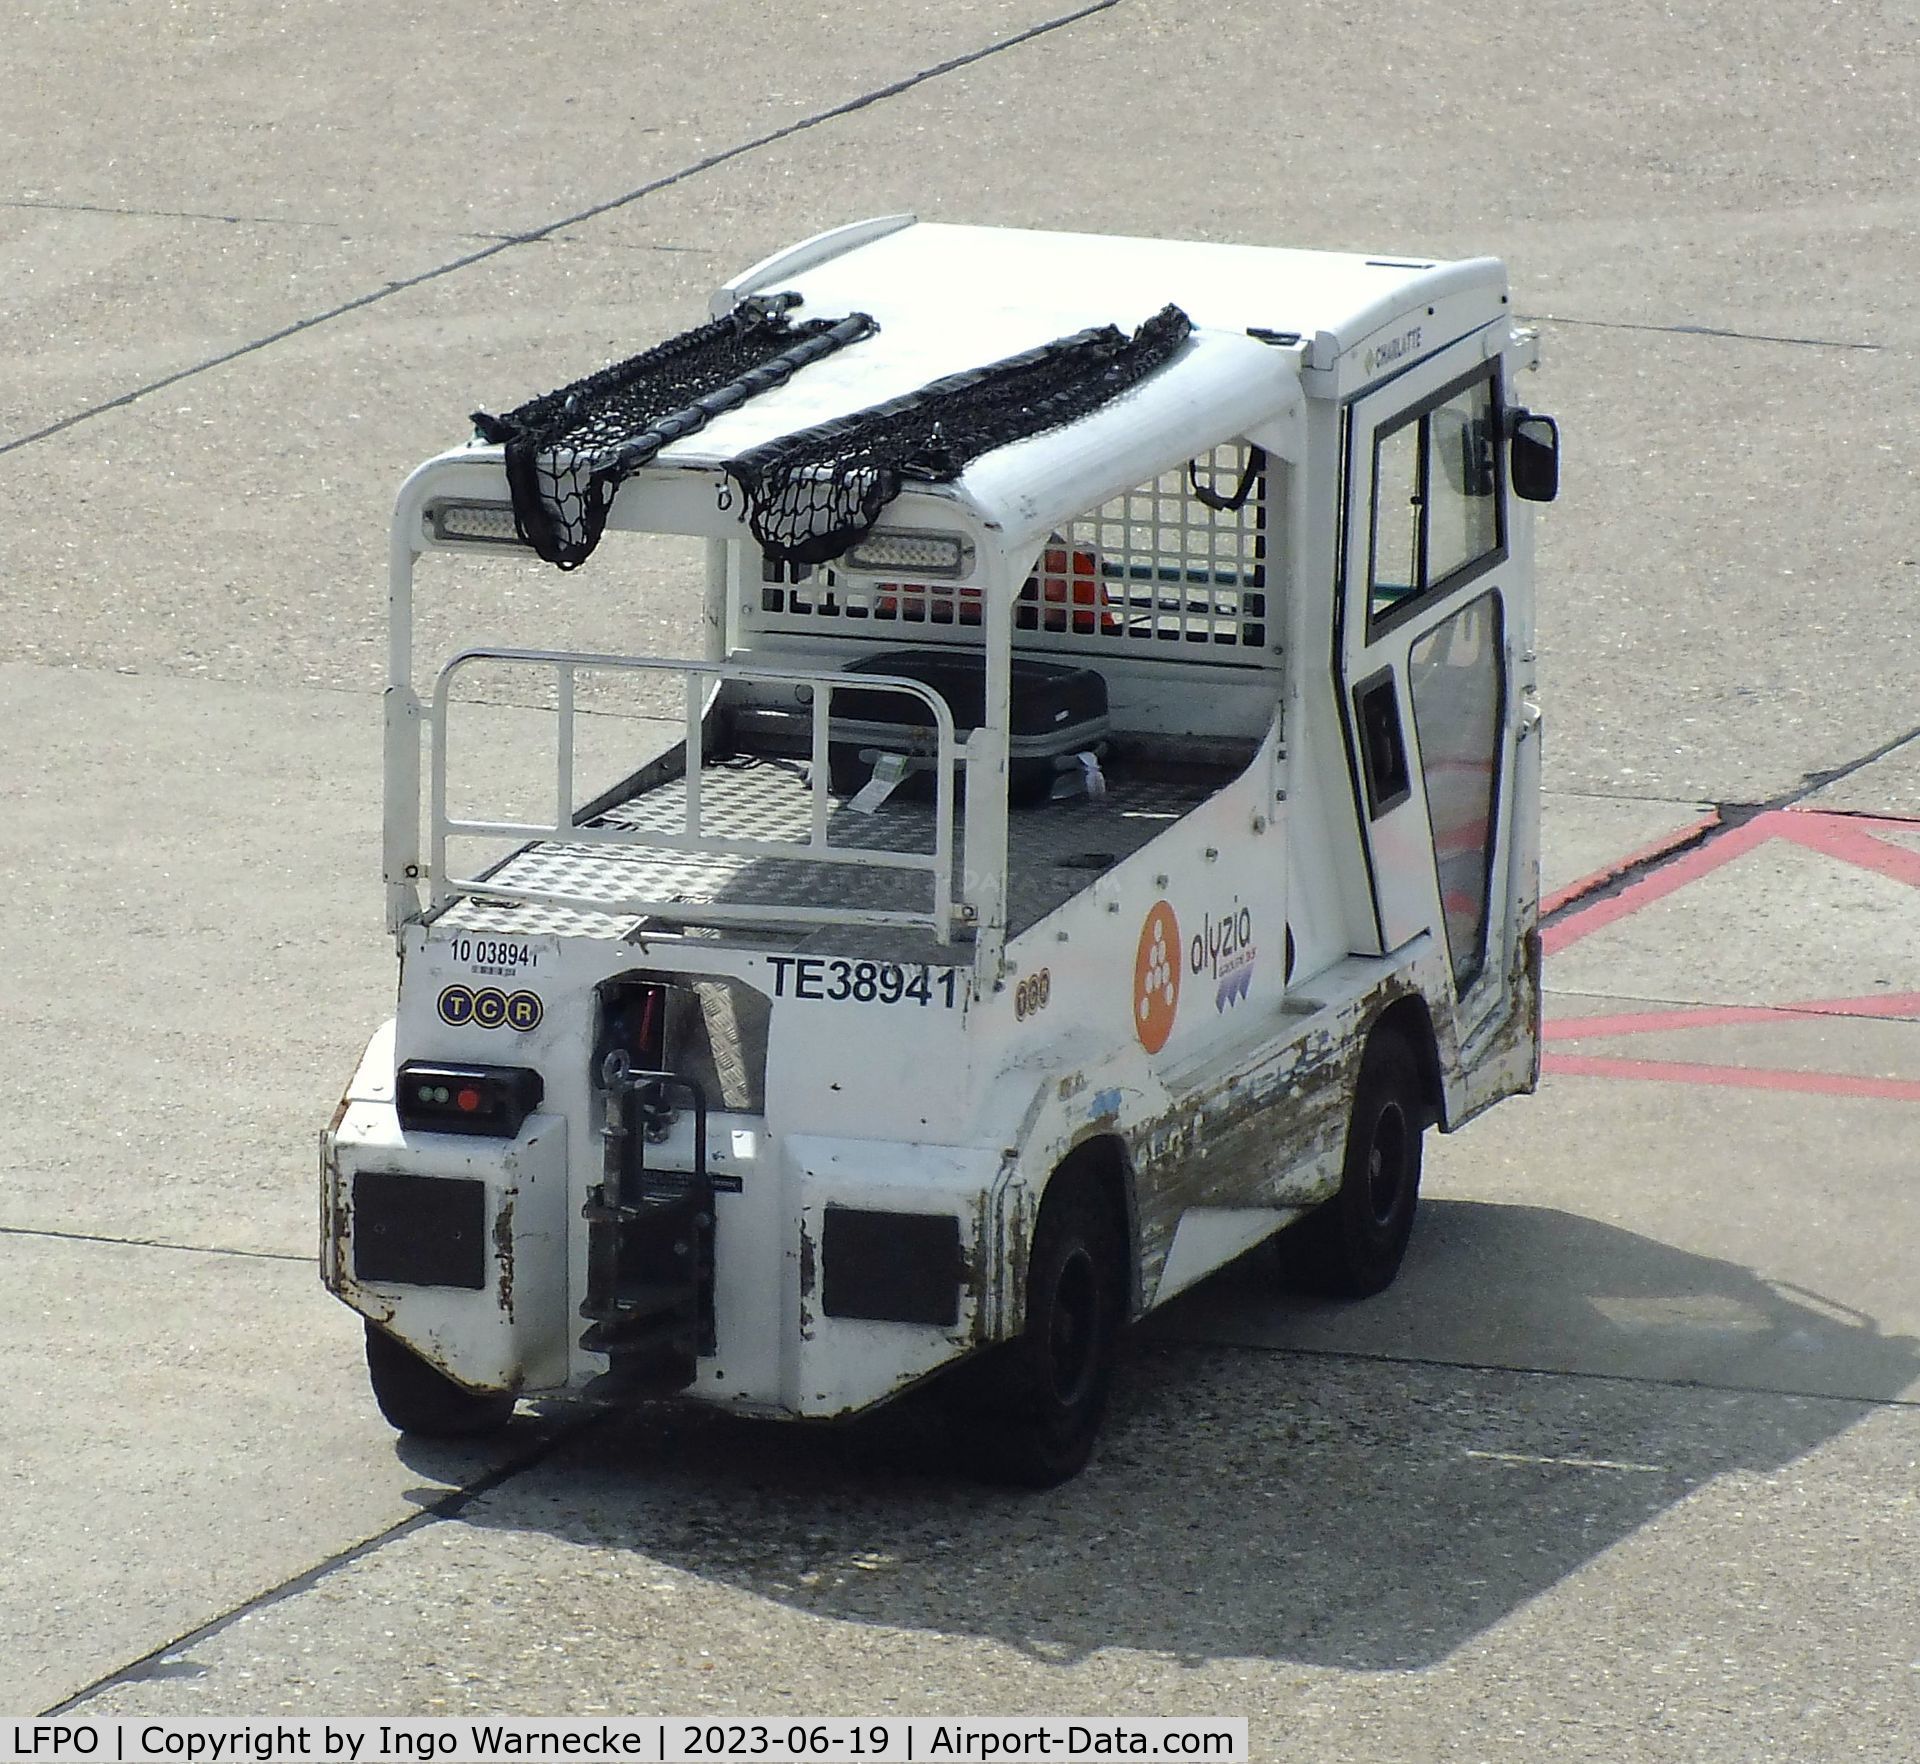 Paris Orly Airport, Orly (near Paris) France (LFPO) - light tow vehicle at Paris/Orly airport